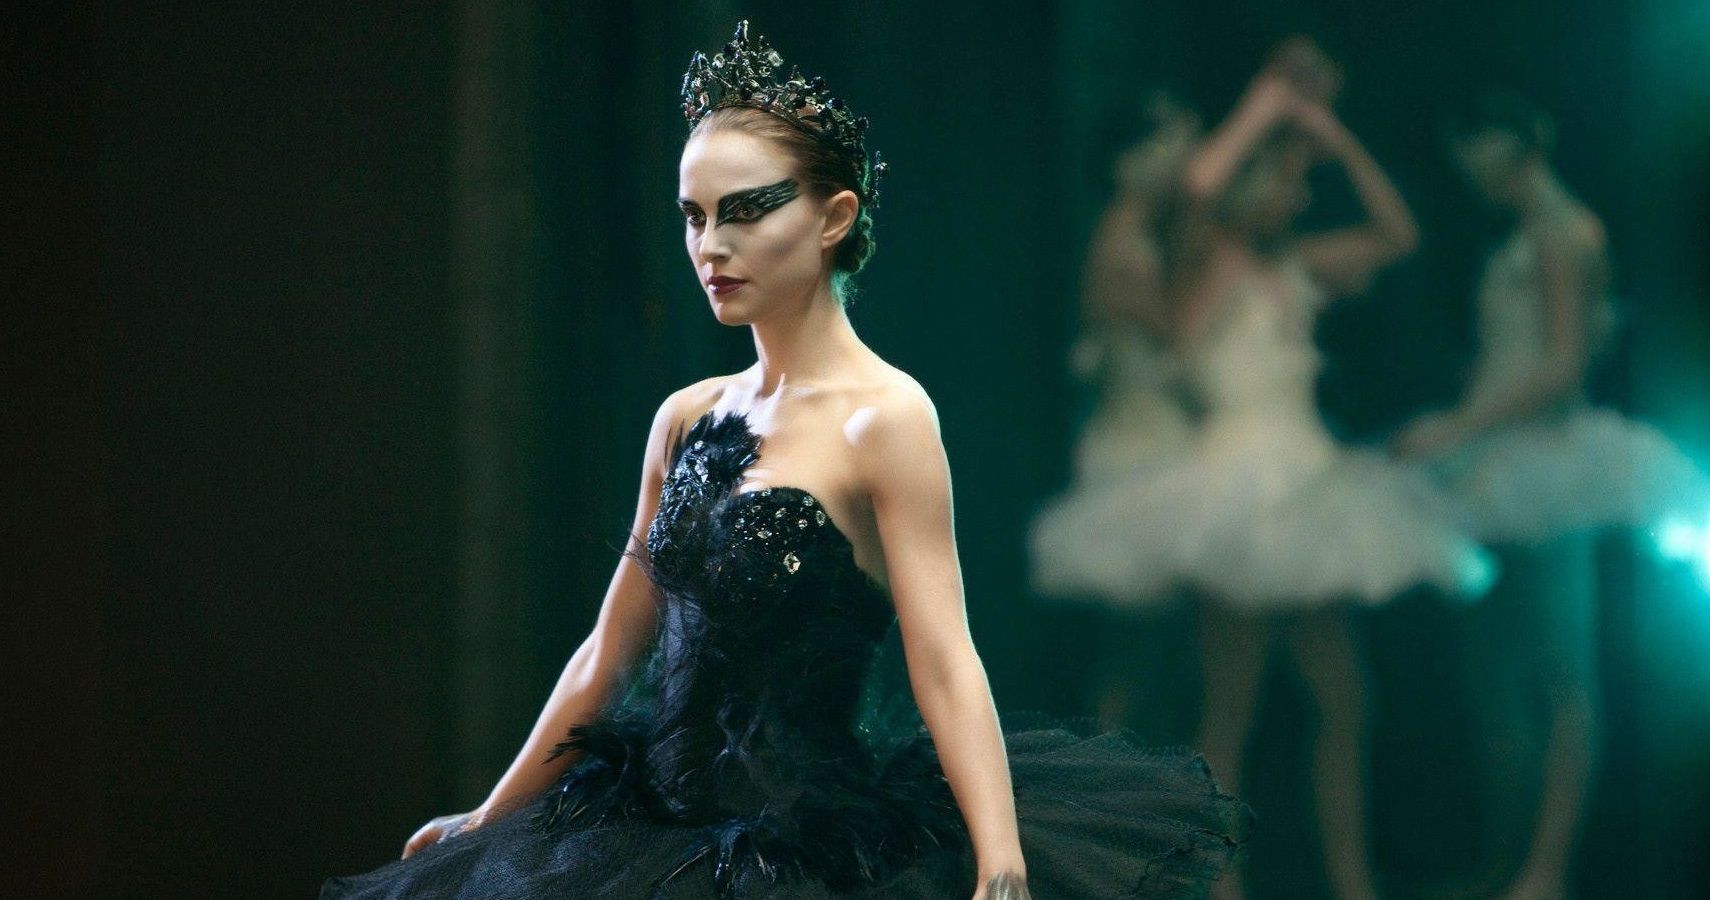 I Want To Be Perfect: 10 Behind-The-Scenes Facts About Black Swan